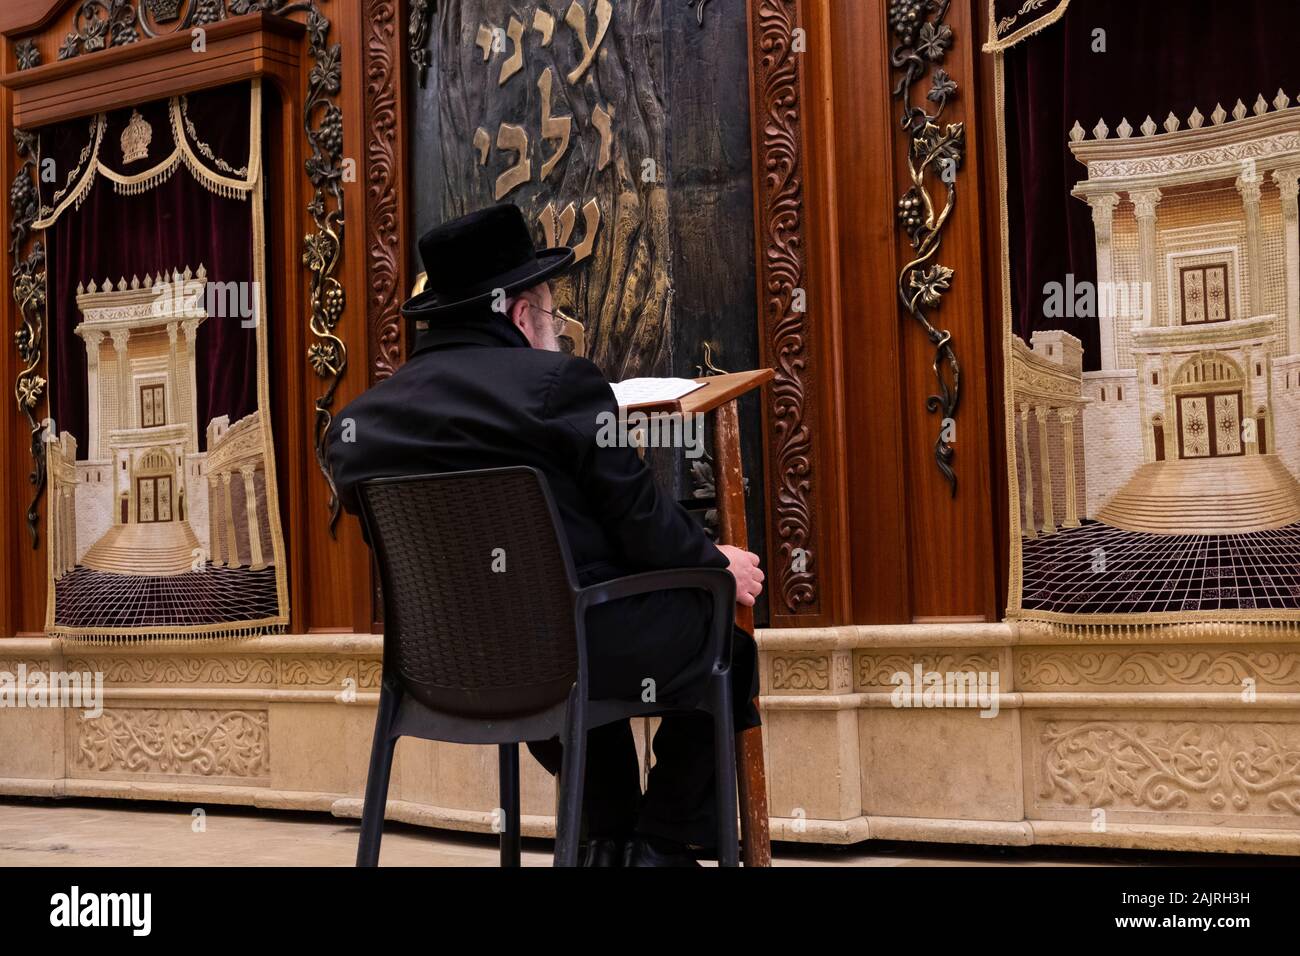 A Jewish worshiper praying at Torah Ark closet which contains the Jewish Torah scrolls decorated with a figure depicting the Biblical Jewish Temple Stock Photo